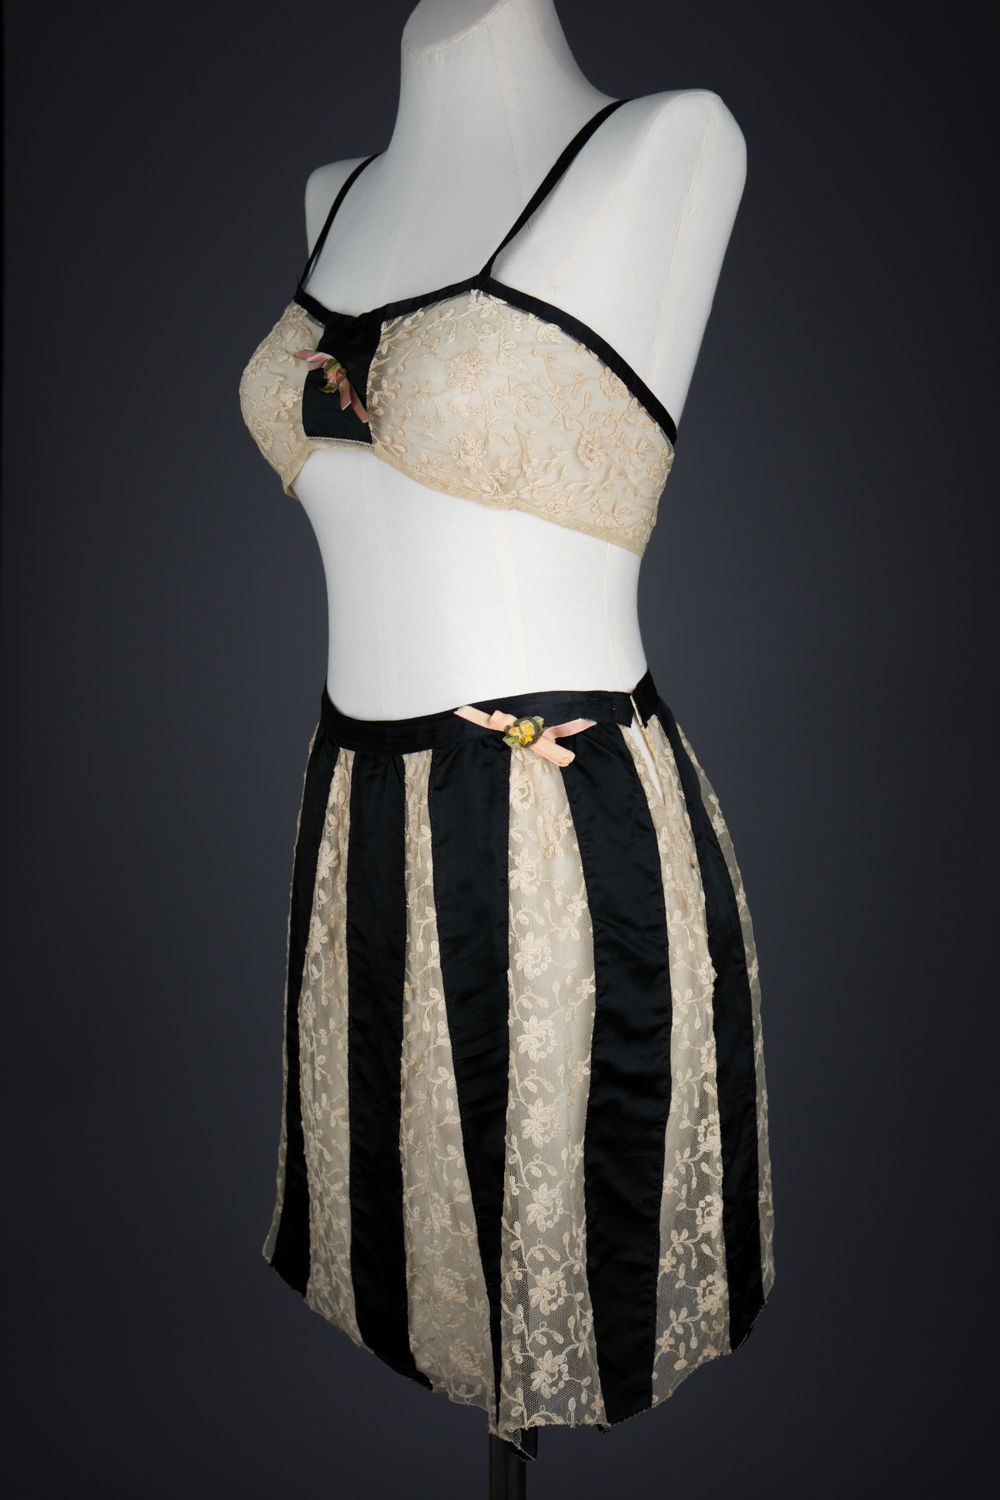 Black Silk & Embroidered Tulle Bra & Tap Pants by Owl Make, c. 1920s, USA. The Underpinnings Museum. Photography by Tigz Rice.